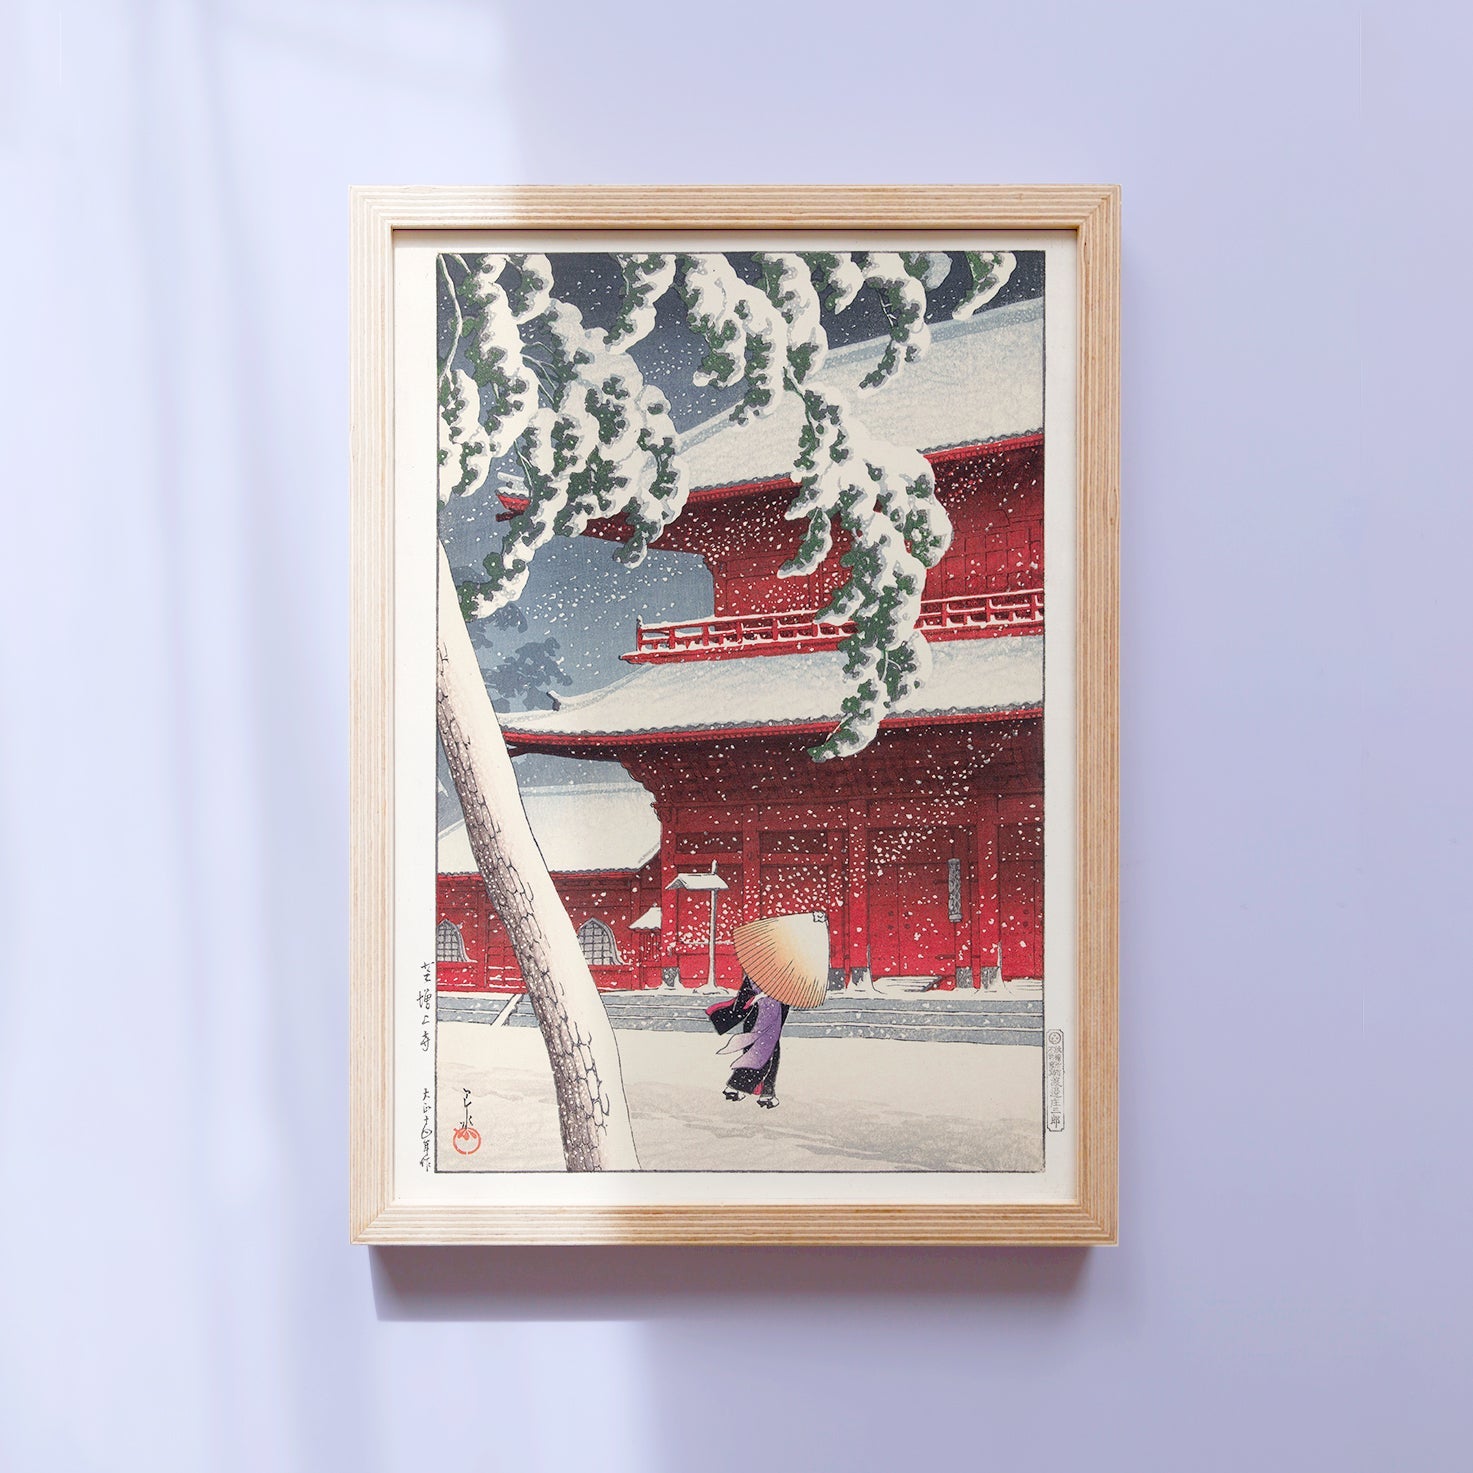 Framed Japanese Art Poster by Kawase Hasui, depicting a woman walking in the snowstorm with an umbrella.